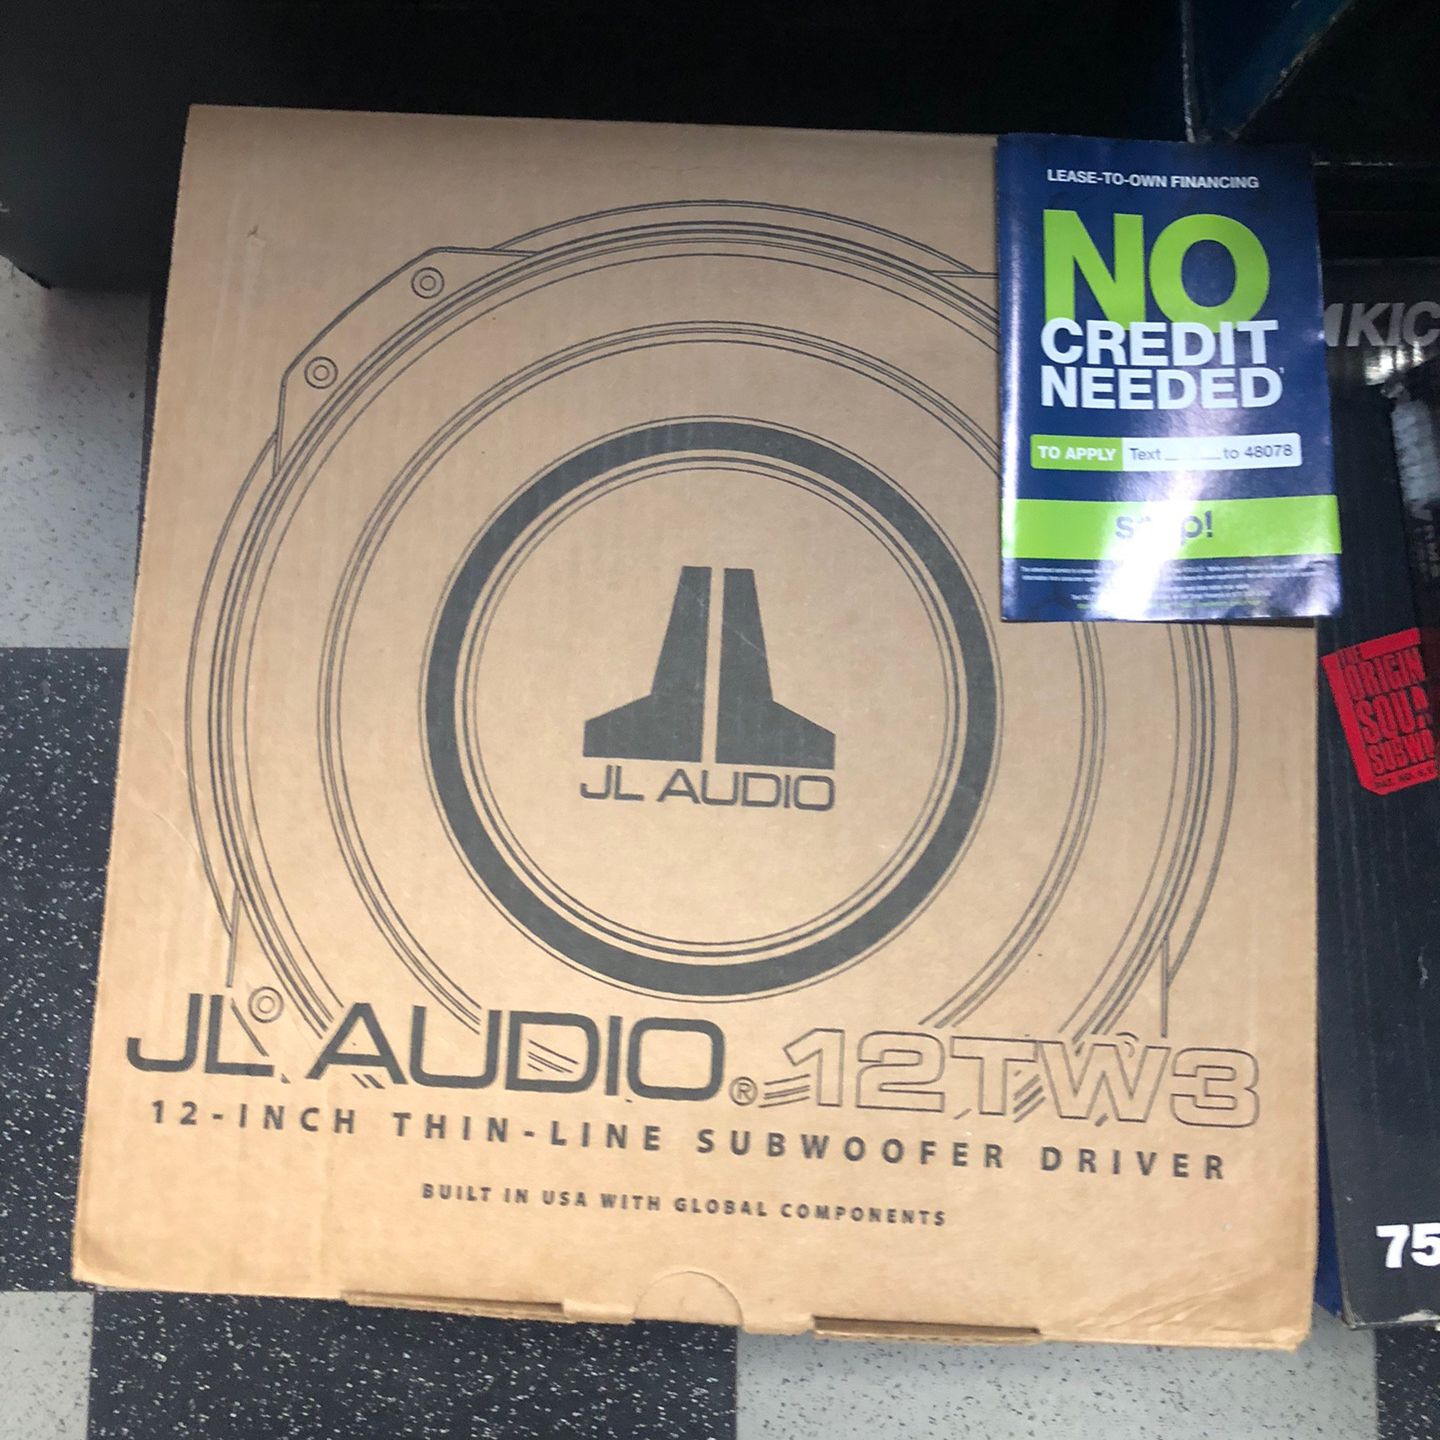 Jl Audio 12tw3 On Sale Today for 375 